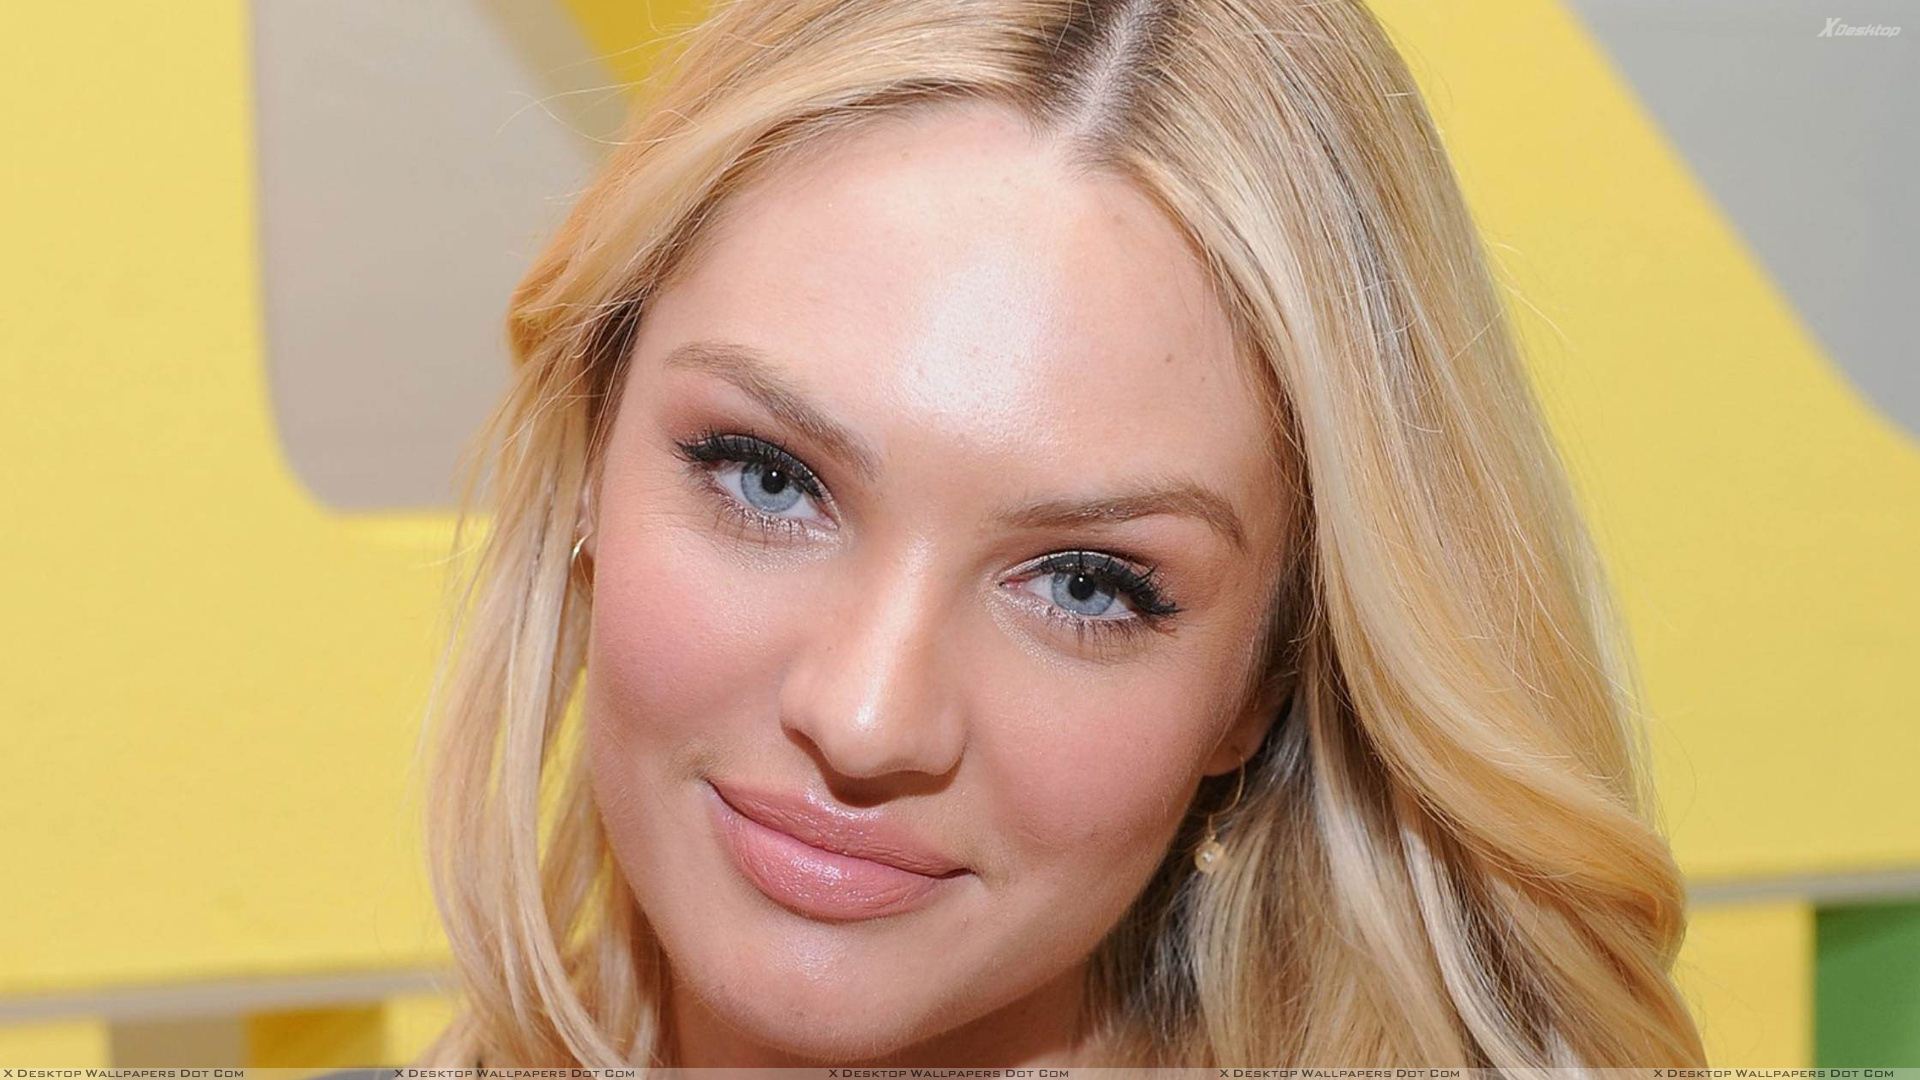 Candice Swanepoel 2020 Wallpapers